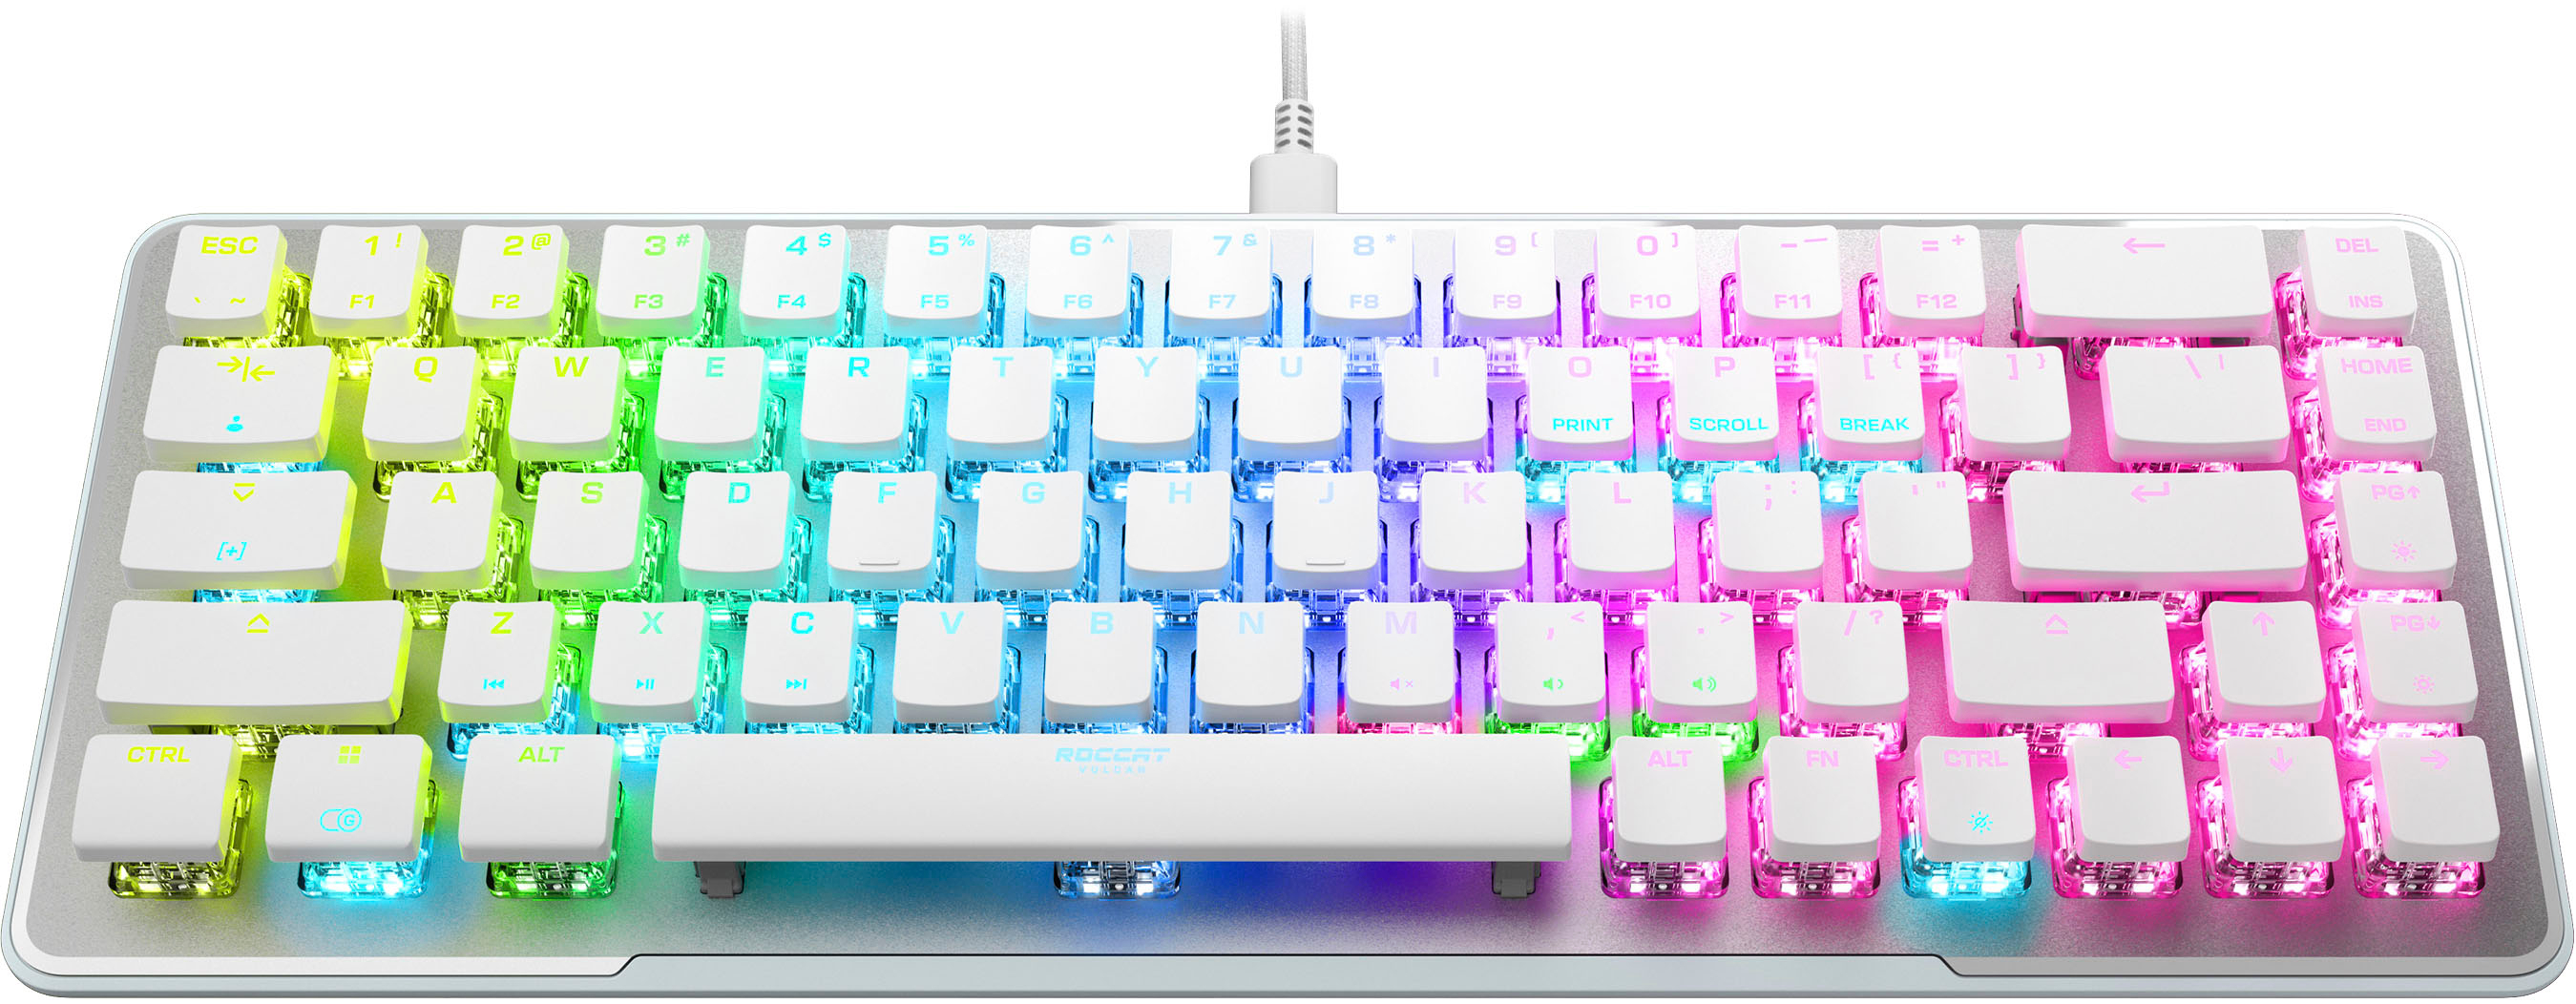 ROCCAT Vulcan TKL Pro Tenkeyless Linear Optical Titan Switch PC Gaming  Keyboard with Per-key AIMO RGB Lighting, Anodized Aluminum Top Plate, and